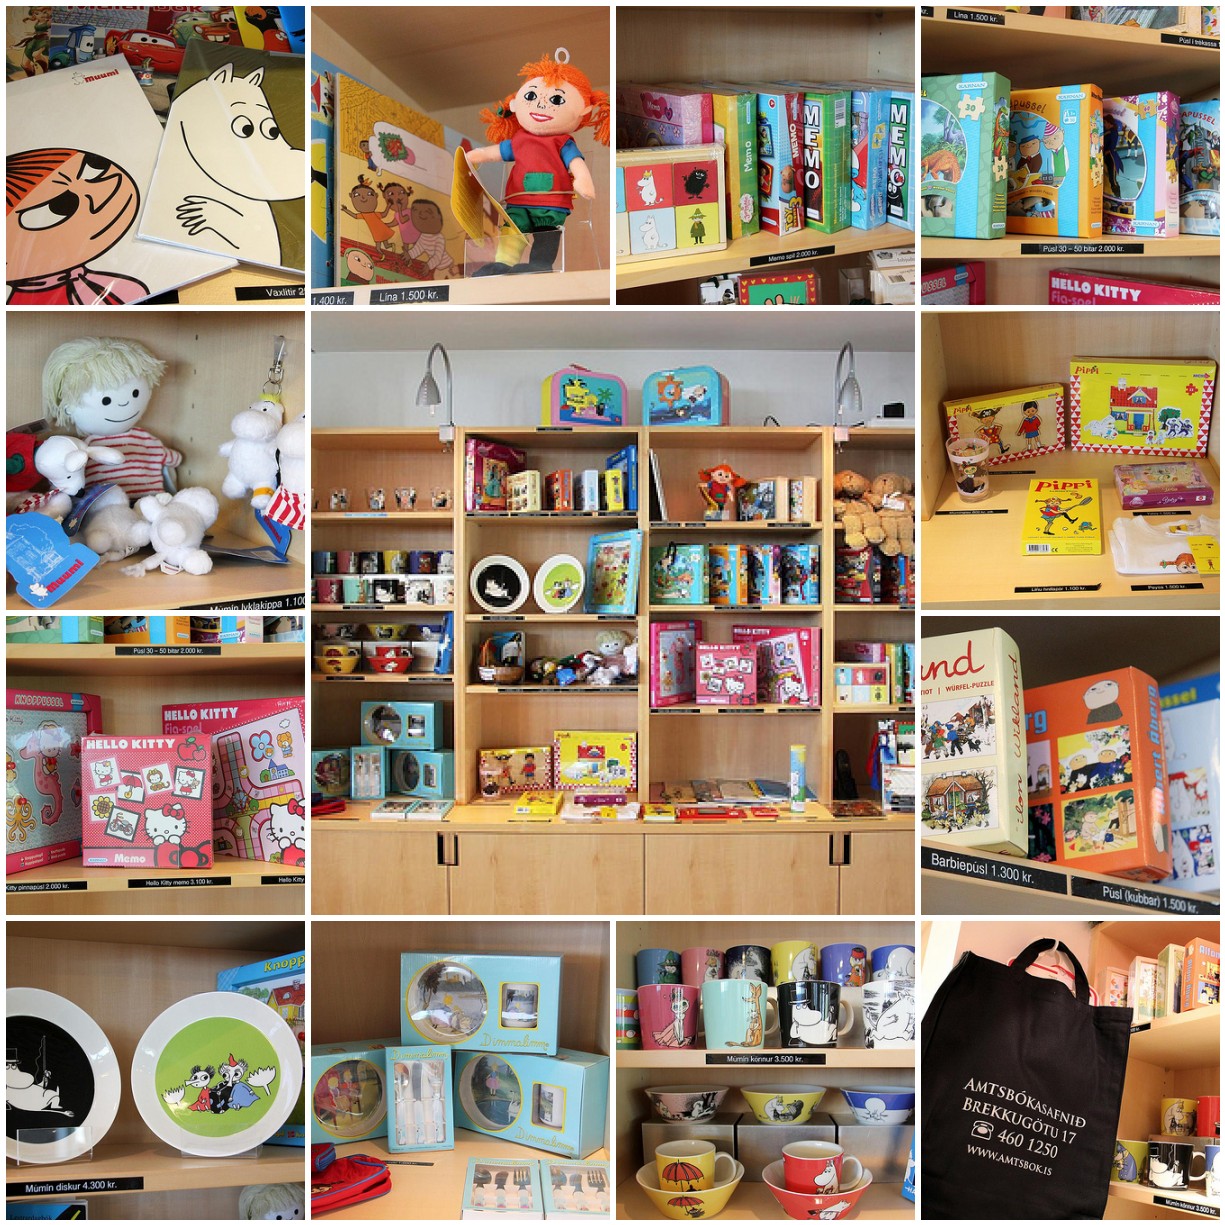 Picture of shelves with items to sell: puzzles, cups, bowls... various merchandize